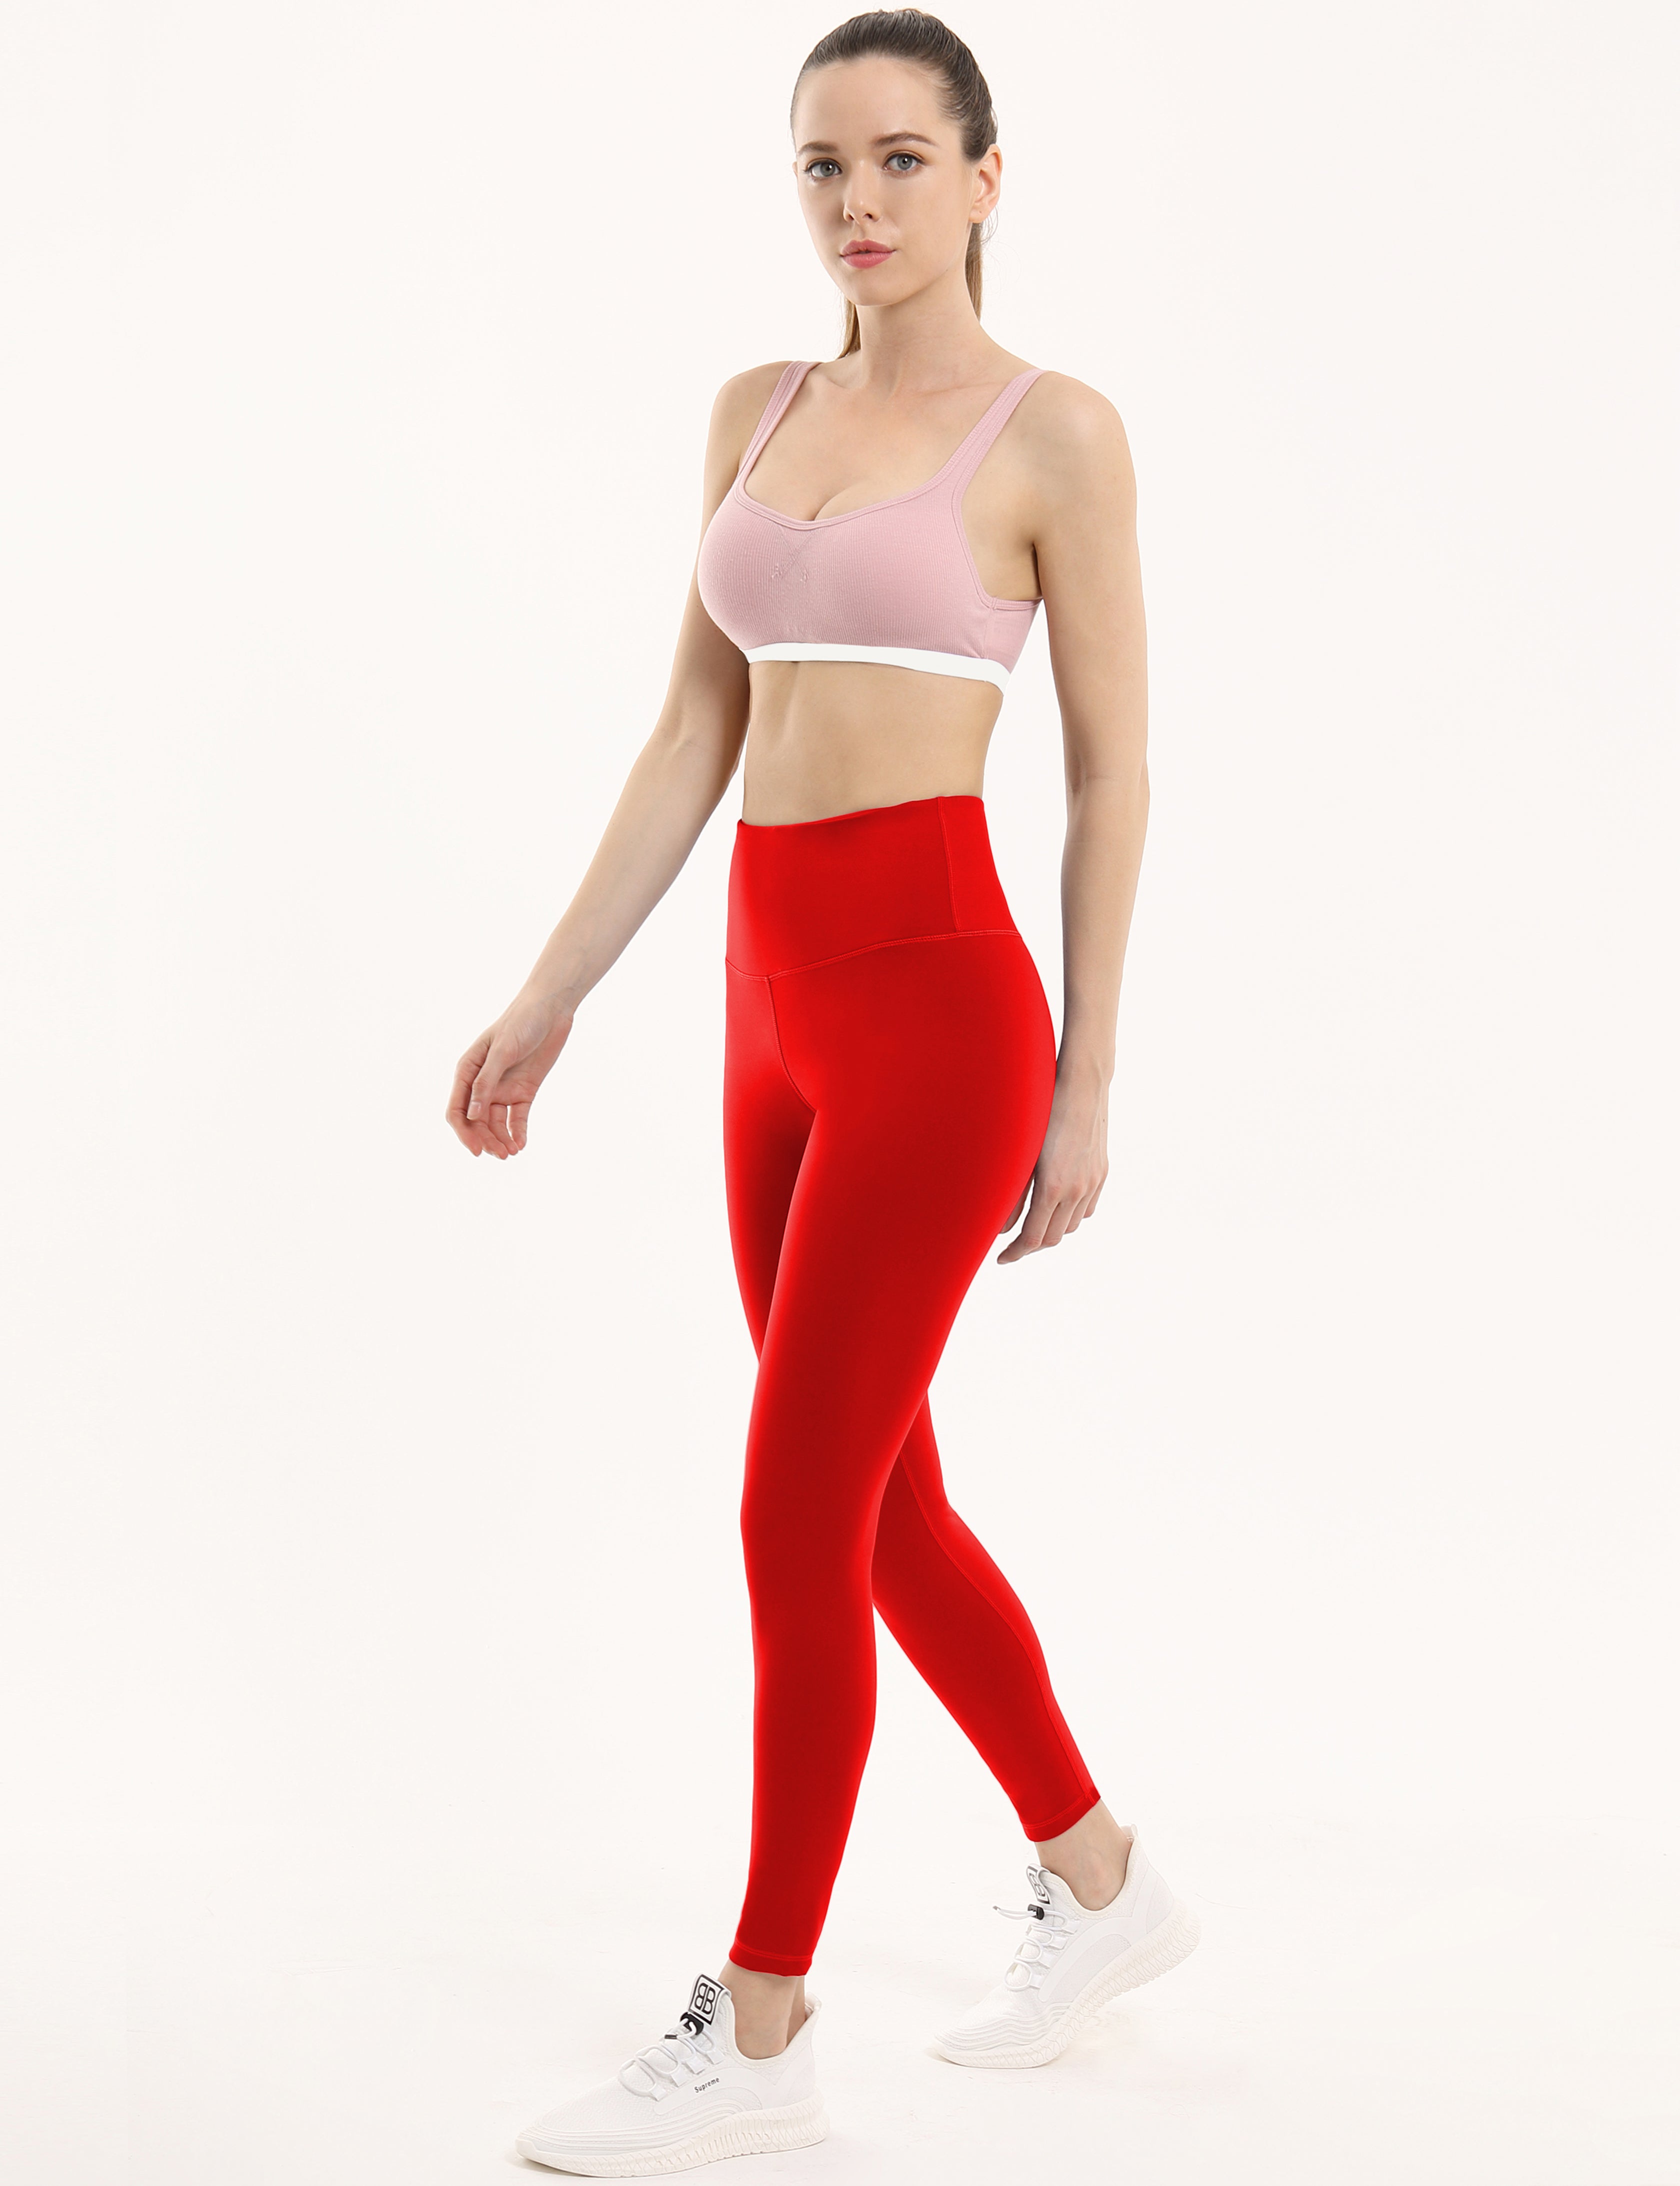 High Waist yogastudio Pants scarlet 75%Nylon/25%Spandex Fabric doesn't attract lint easily 4-way stretch No see-through Moisture-wicking Tummy control Inner pocket Four lengths